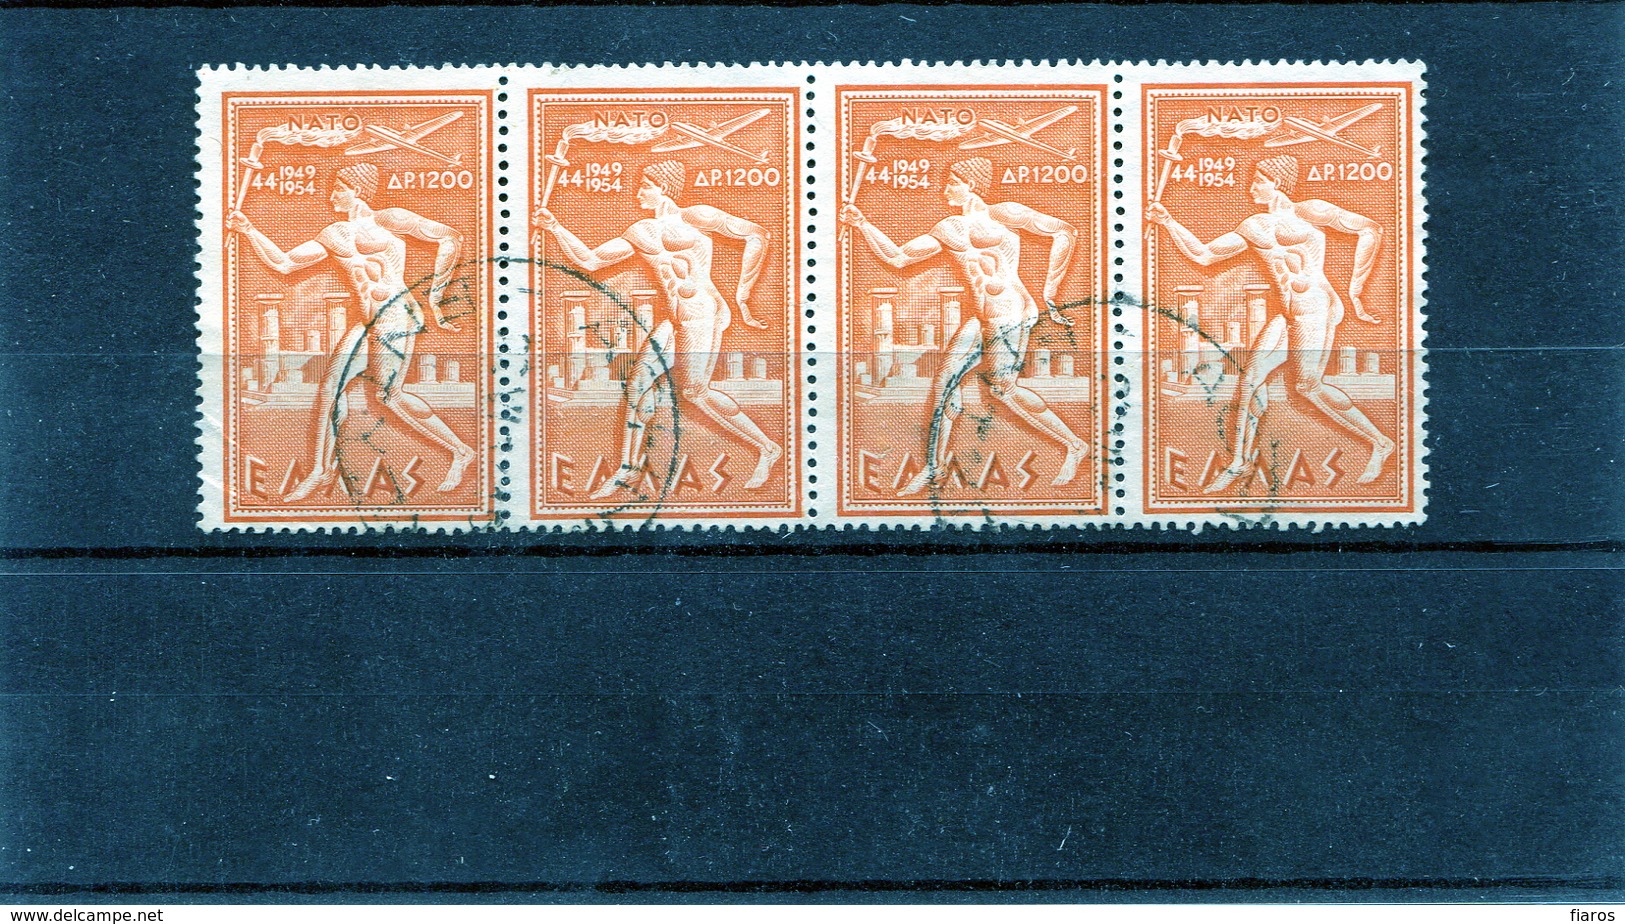 1954-Greece- "N.A.T.O." Airpost- 1.200dr. Used In Strip Of 4, W/ "Athens - Printed Matter" [22.6.1954] Type X Postmarks - Used Stamps